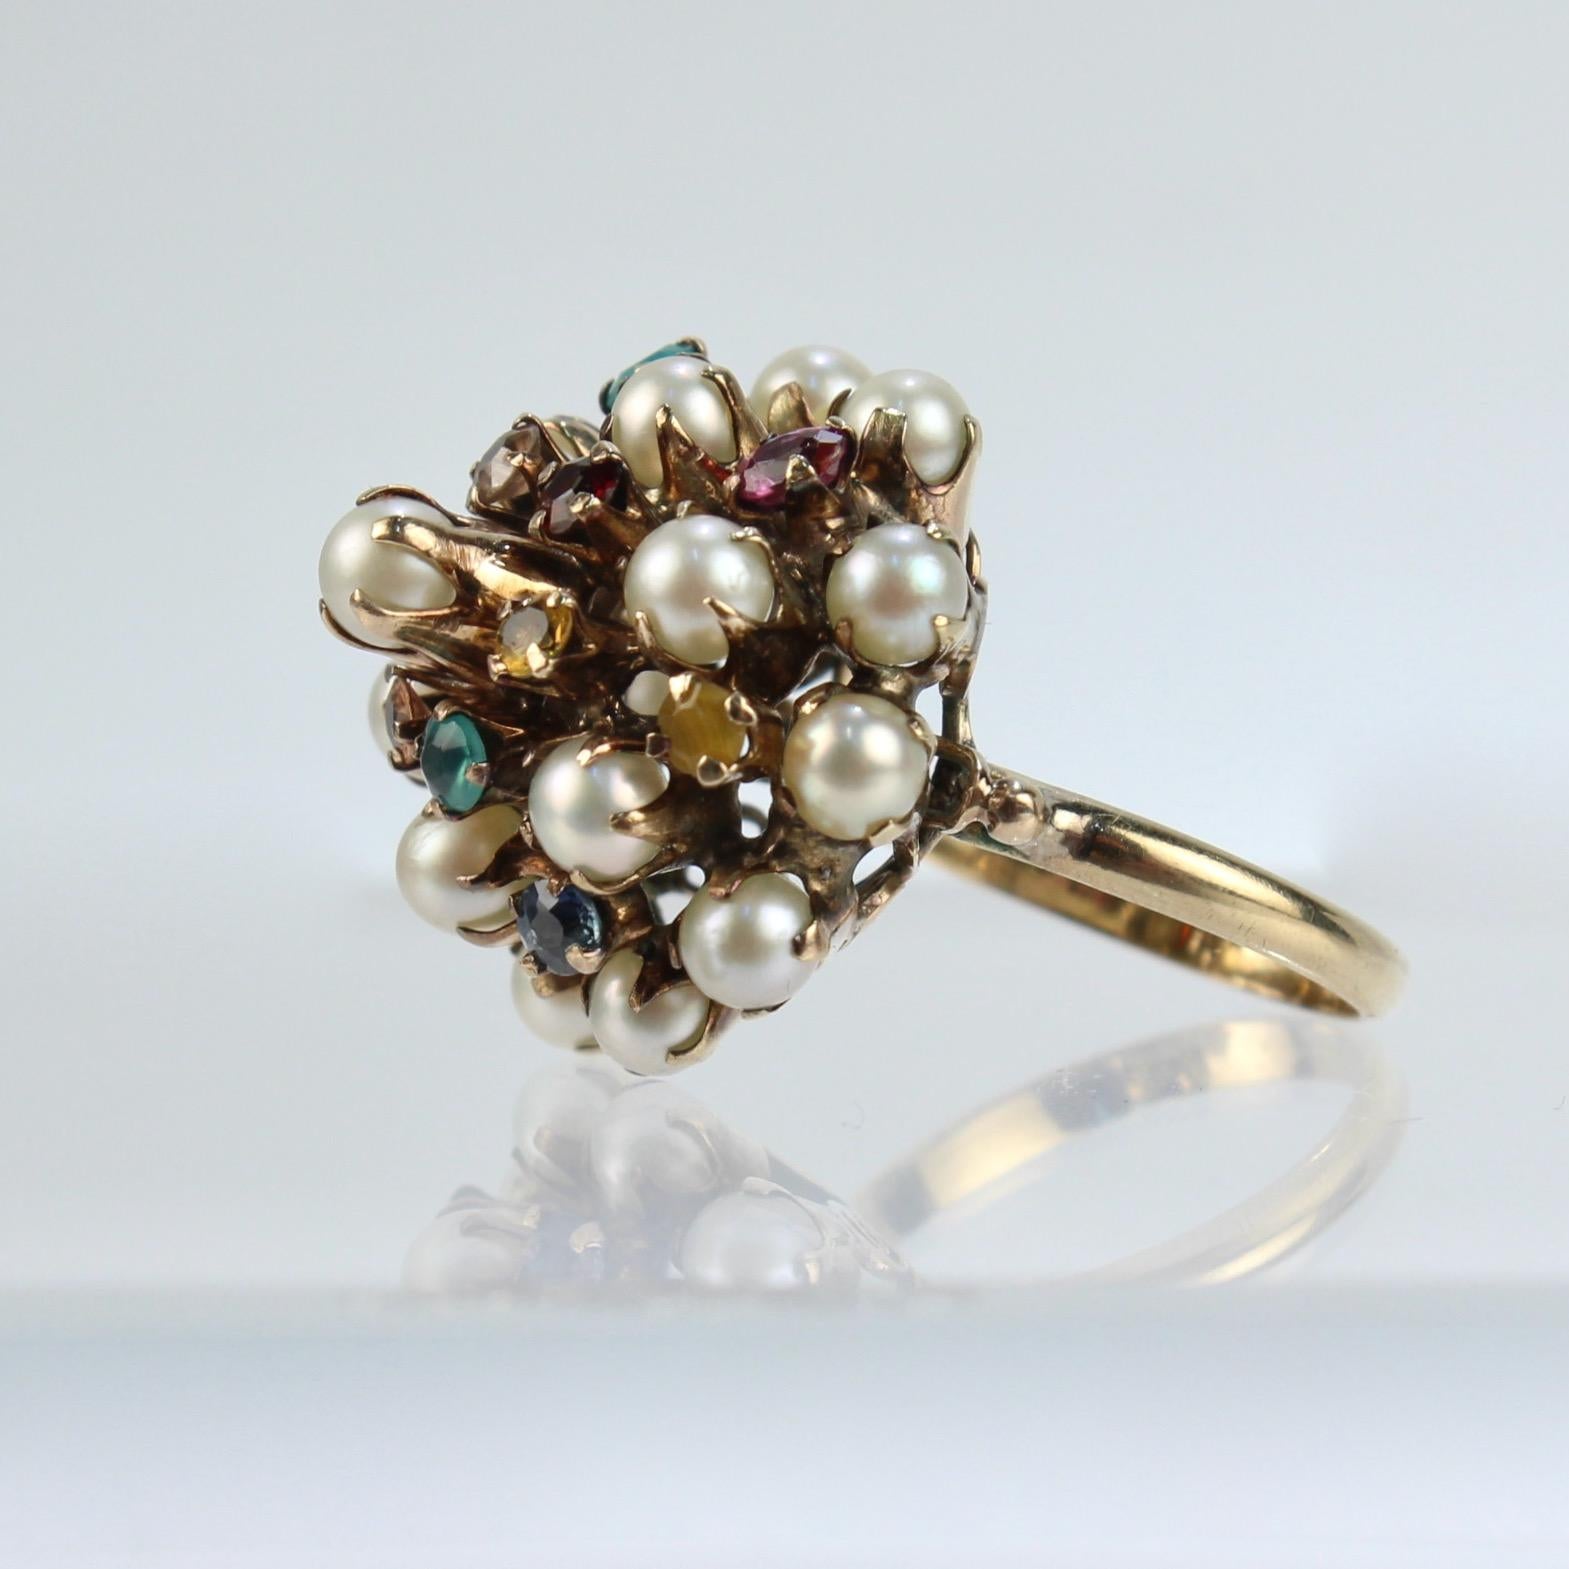 A very fine vintage 10k gold, cultured pearl & gemstone Princess Harem ring.

Set with 12 small round cut gemstones including emeralds, amethysts, citrines and 17 small round, white pearls.

Simply a great cocktail ring!

Date:
20th Century

Overall